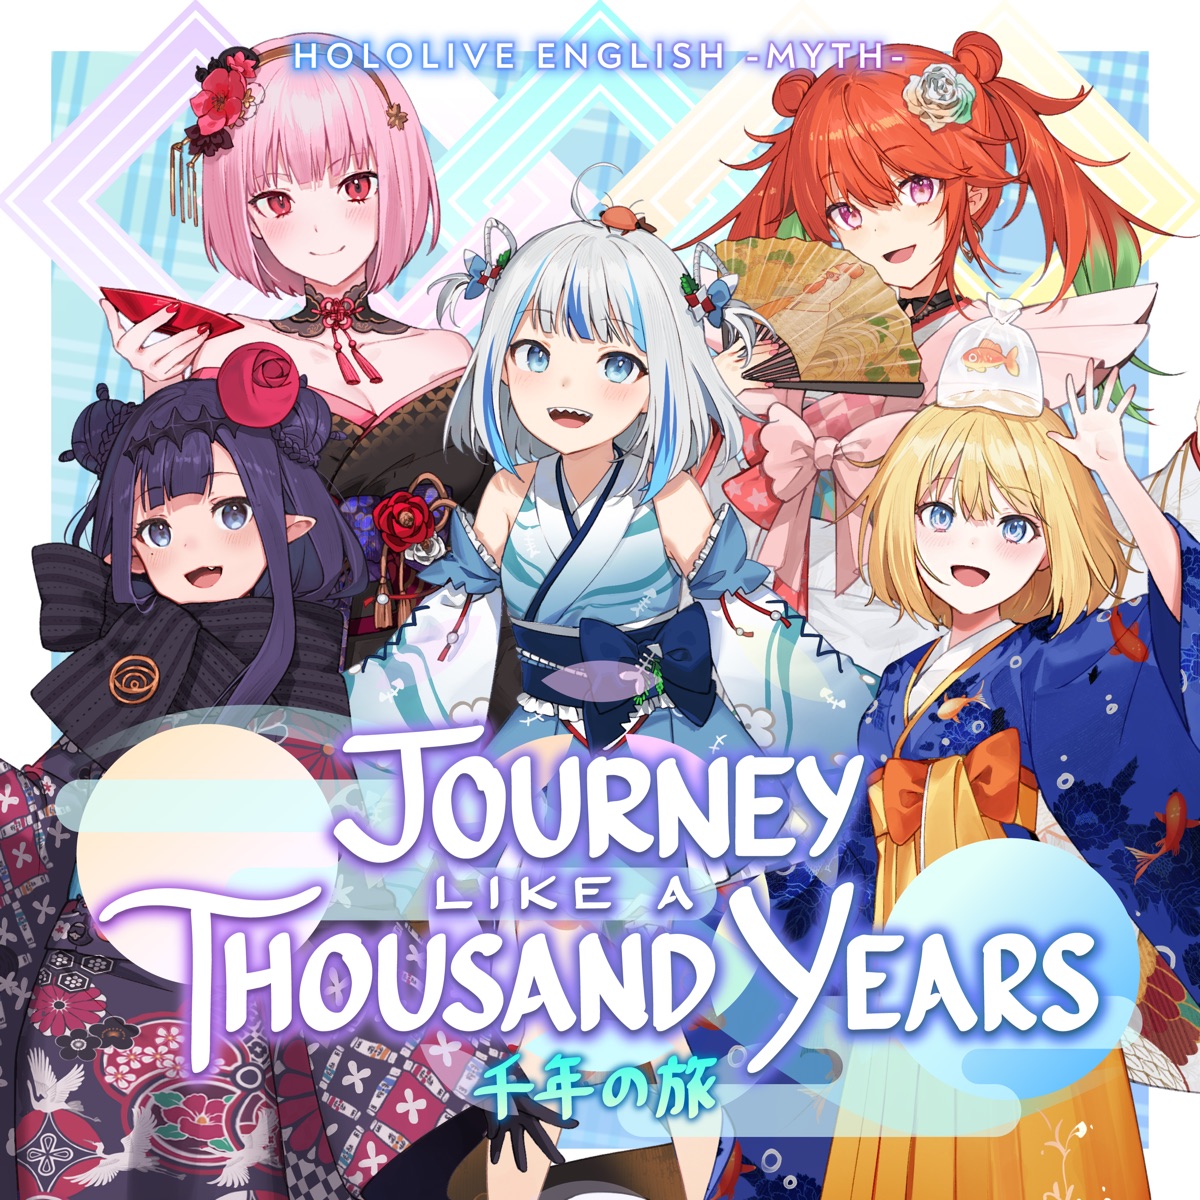 Cover for『hololive English -Myth- - Journey Like a Thousand Years』from the release『Journey Like a Thousand Years』